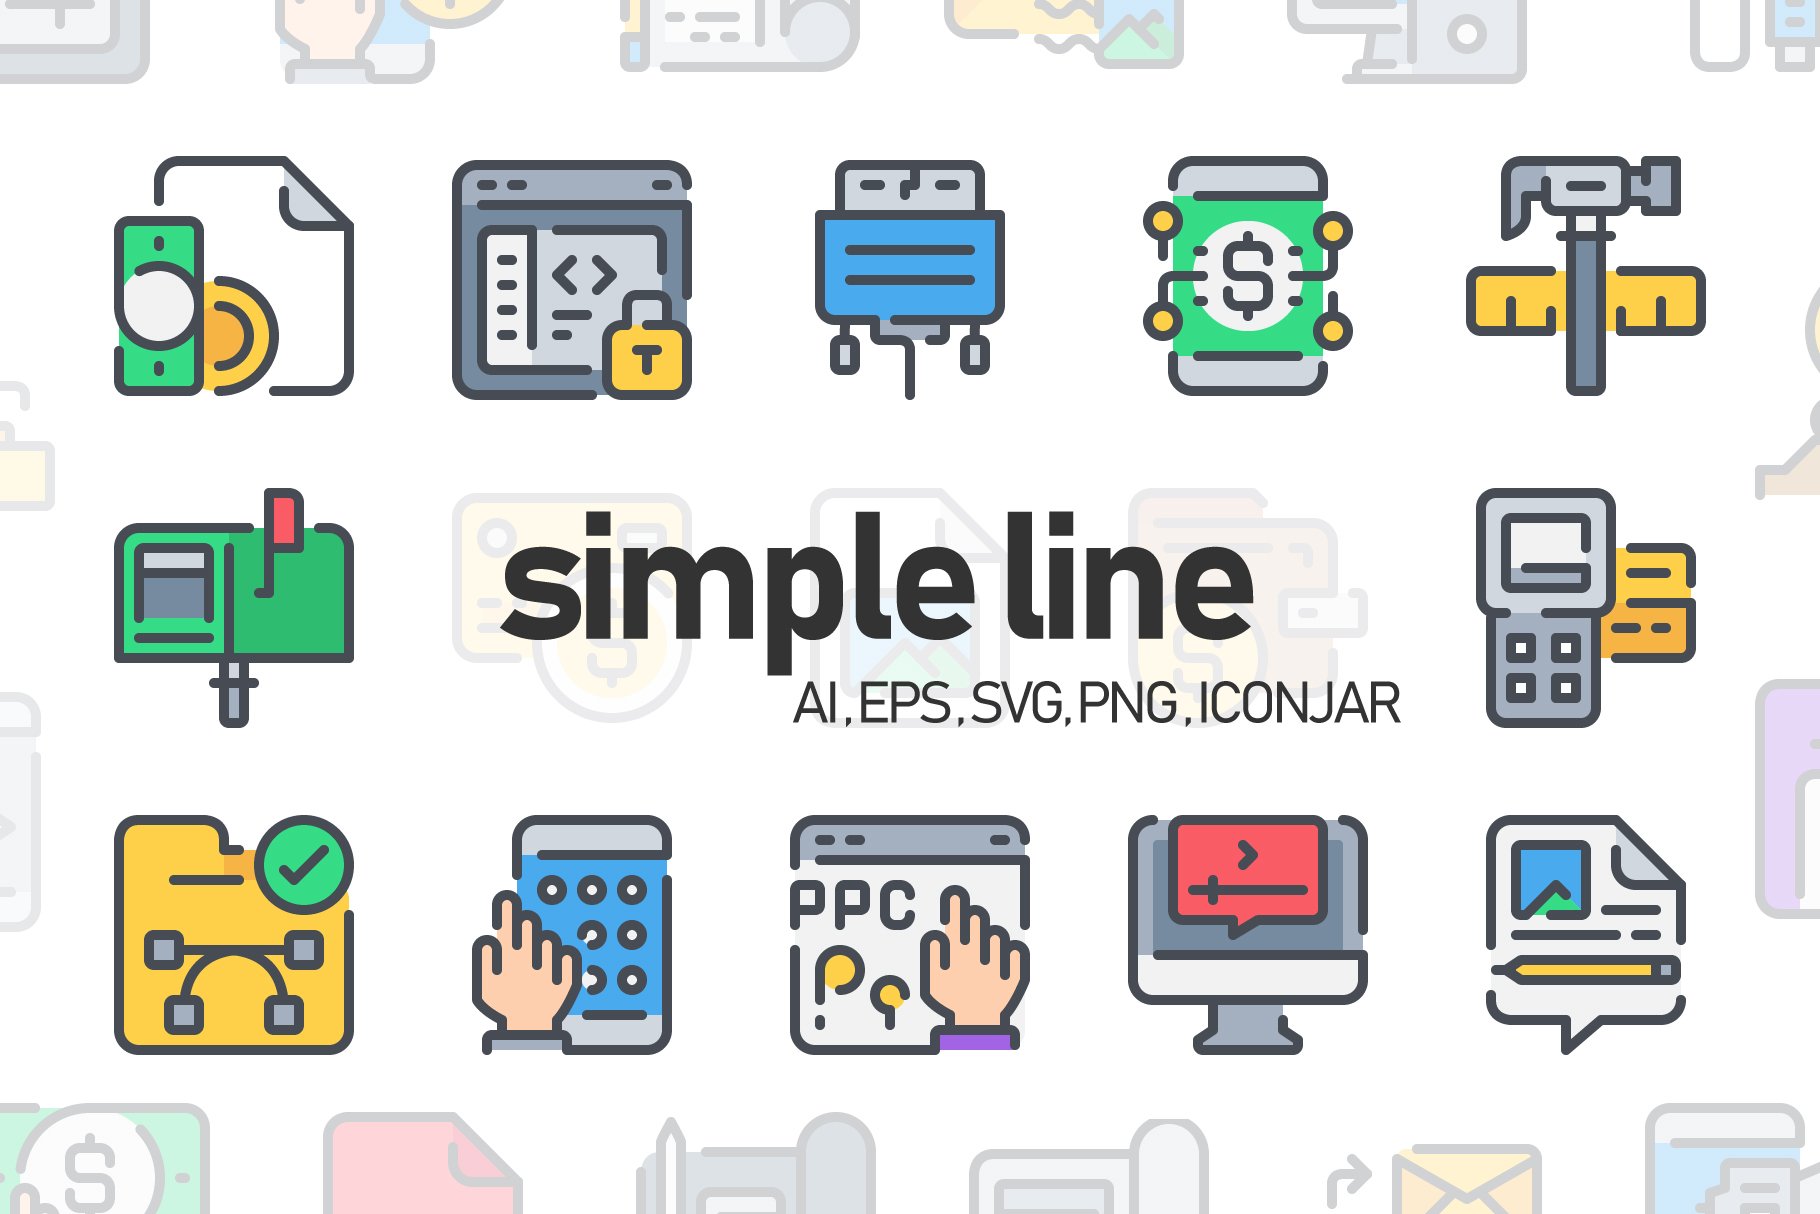 750 Simple Line Icon x2 cover image.